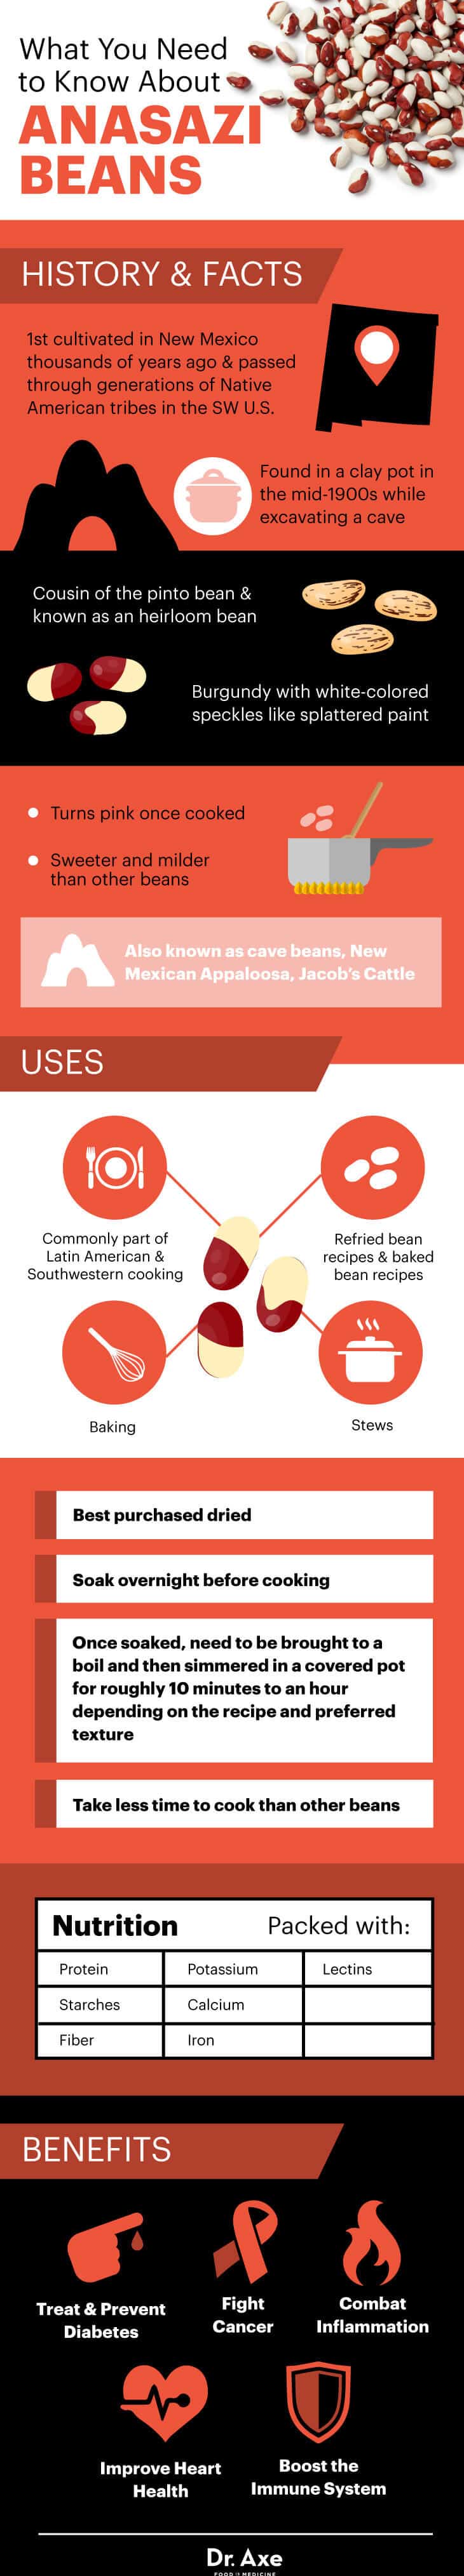 What you need to know about anasazi beans - Dr. Axe